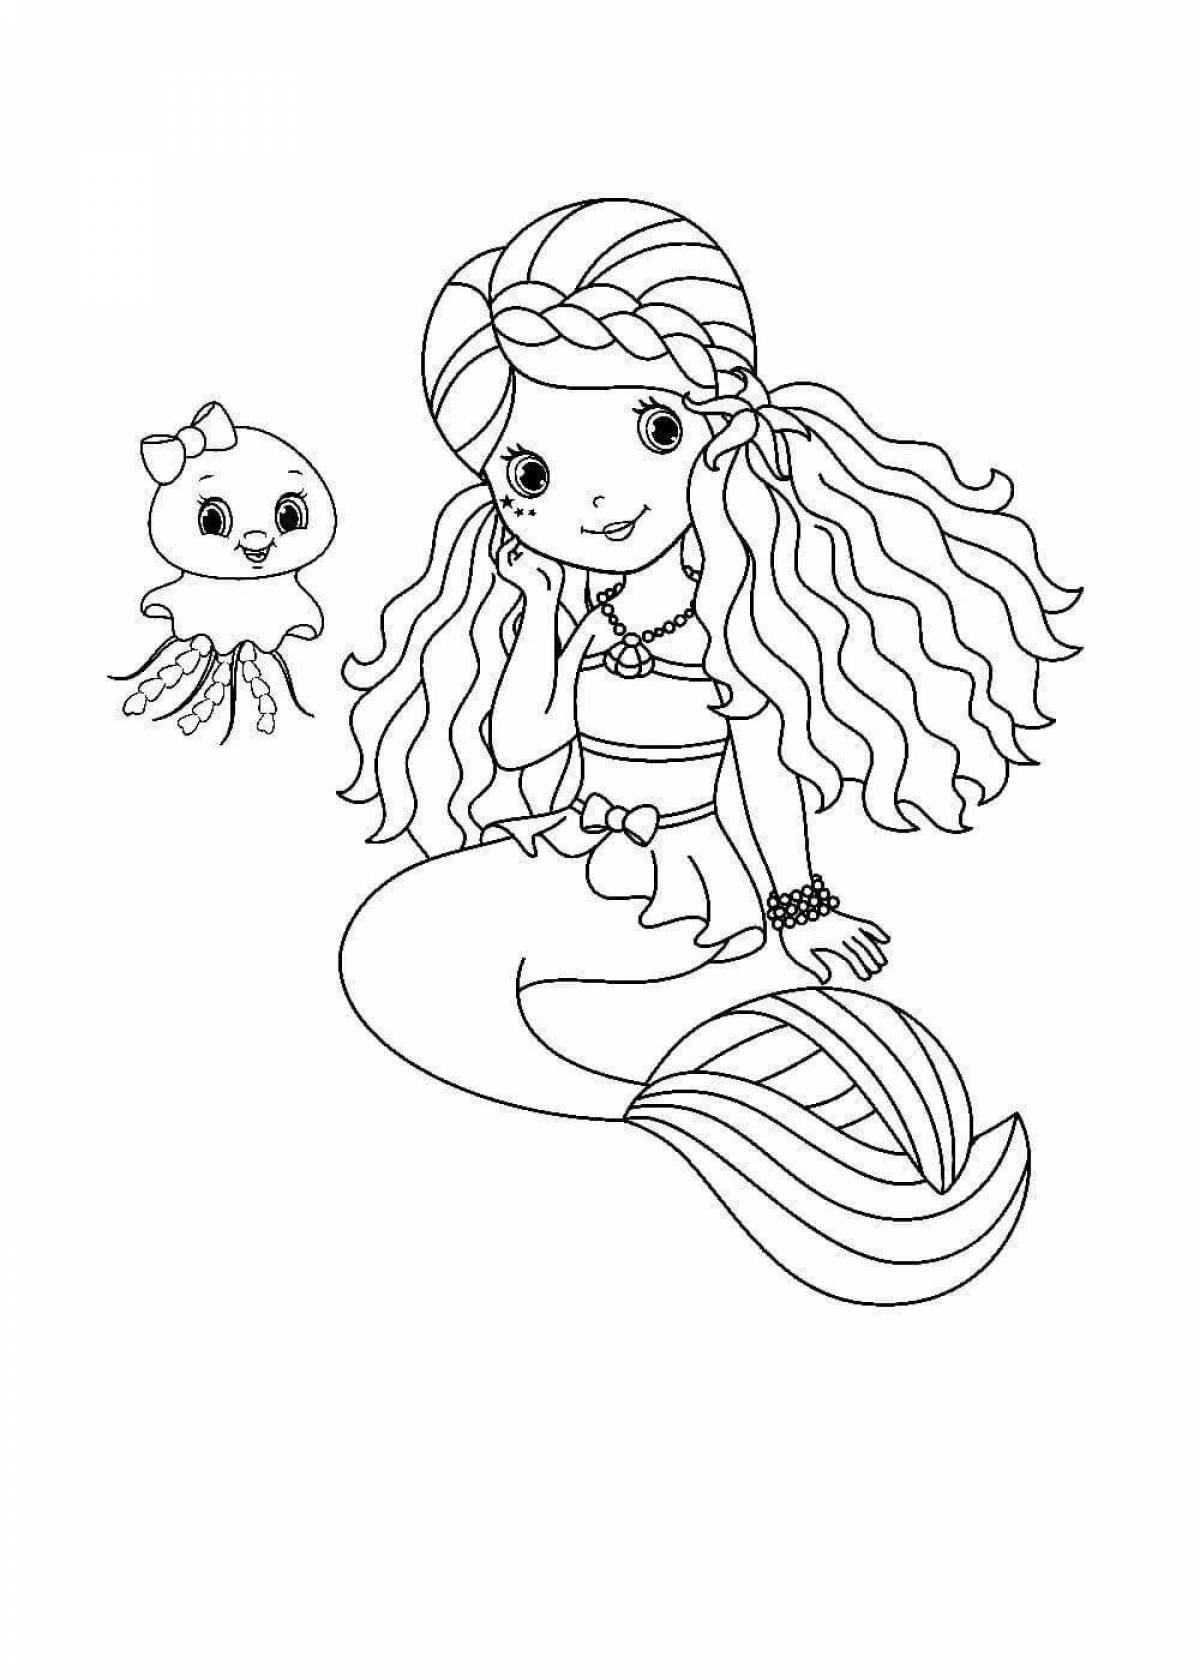 Animated enchantimals jellyfish coloring page